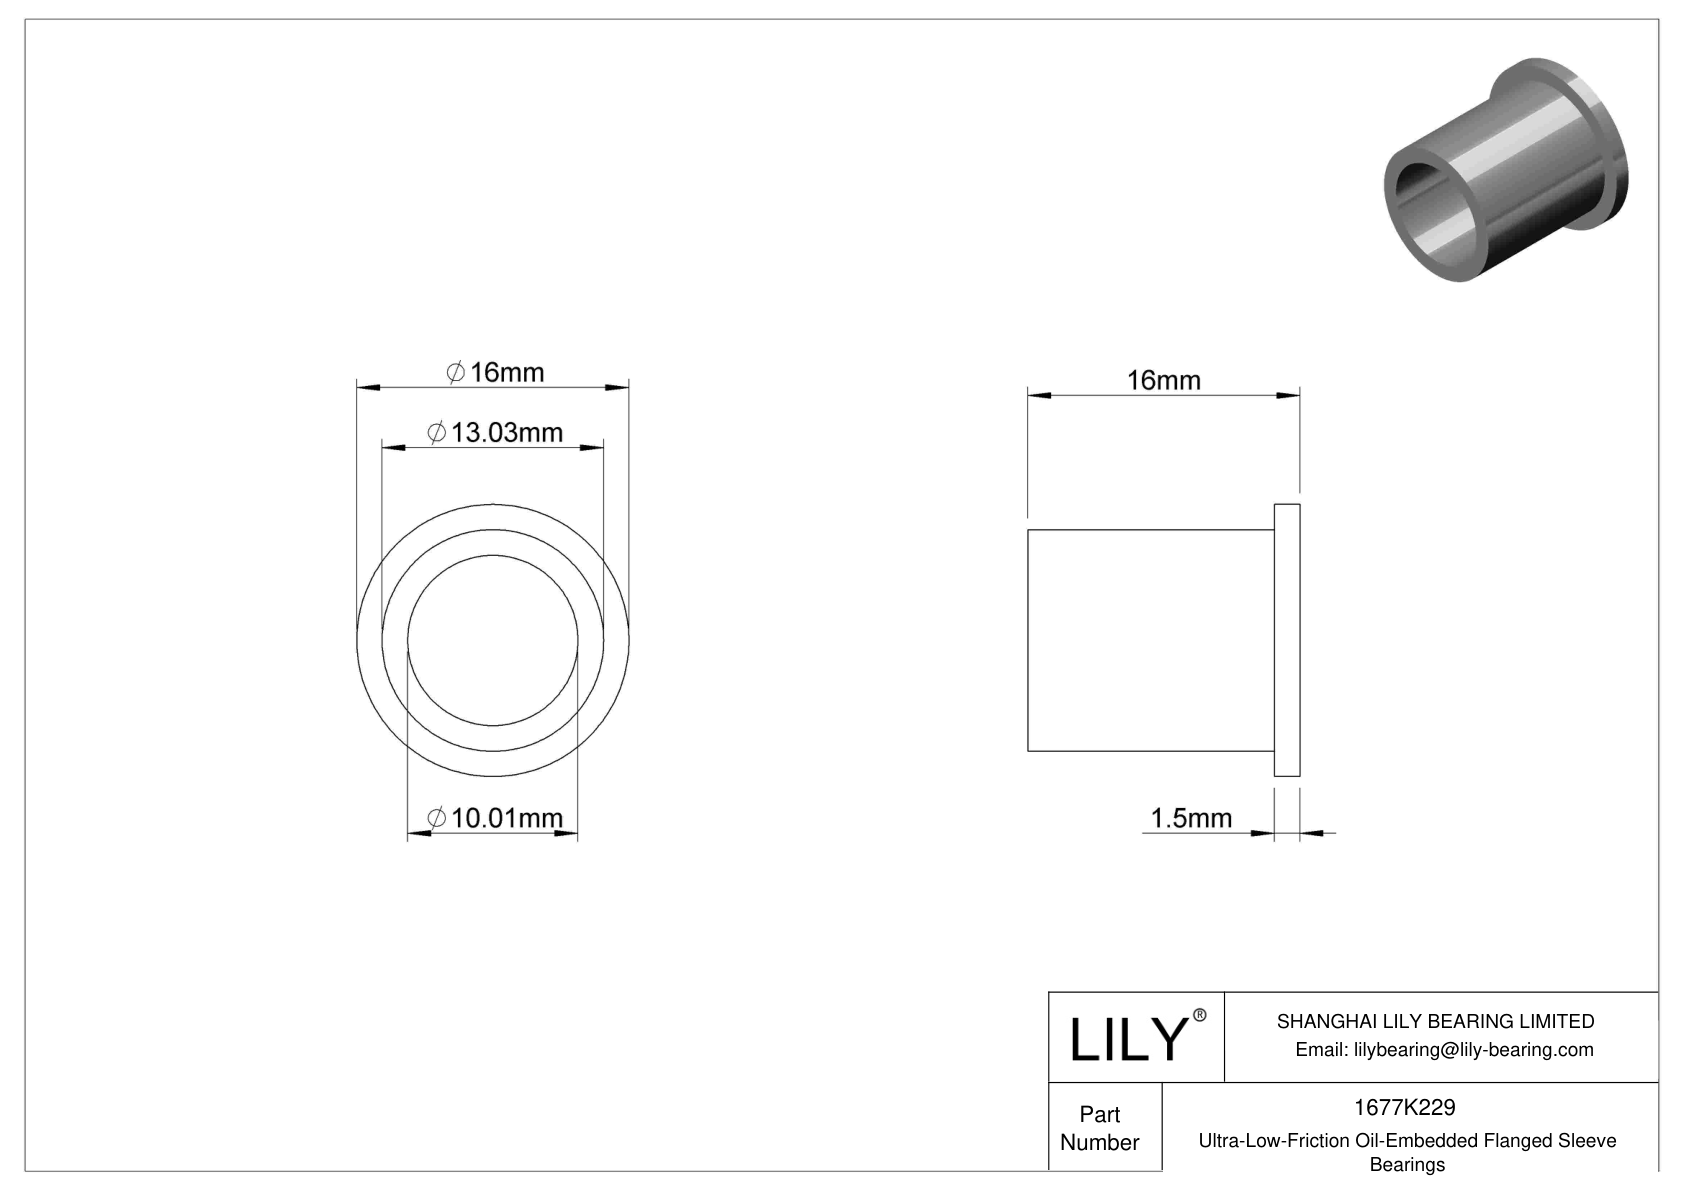 BGHHKCCJ Ultra-Low-Friction Oil-Embedded Flanged Sleeve Bearings cad drawing